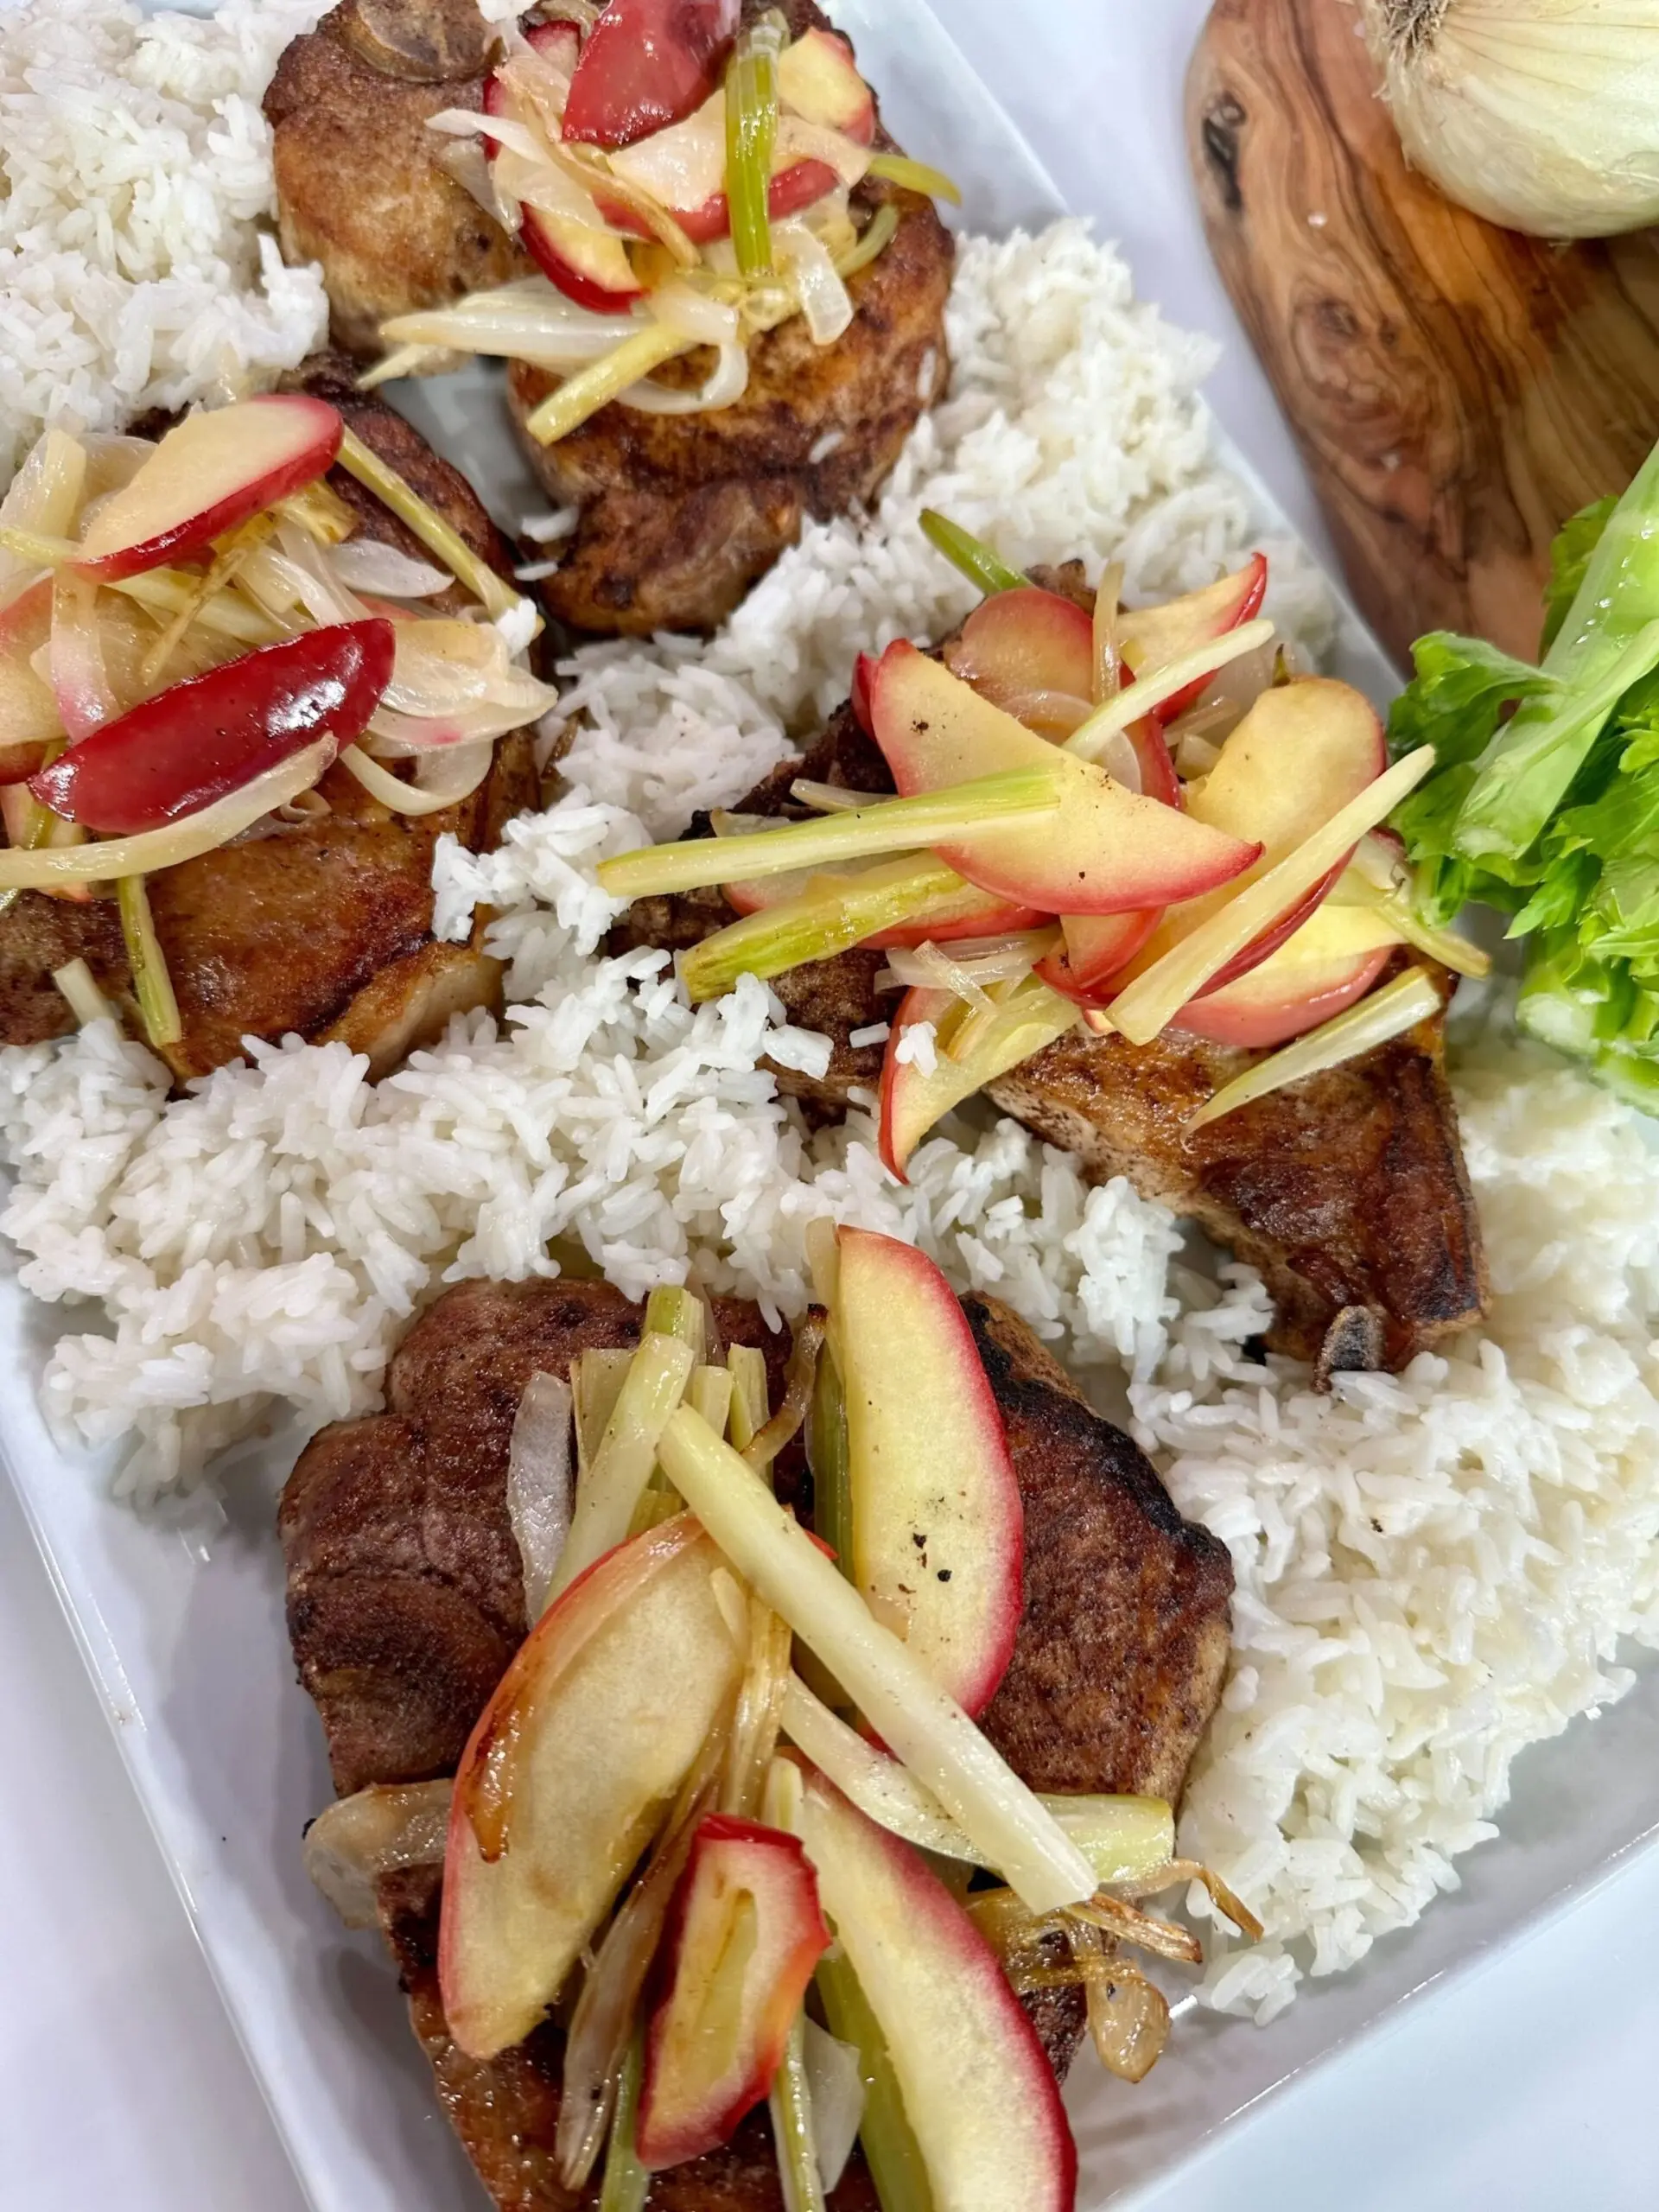 PHOTO: A plate of pork over rice topped with apples.